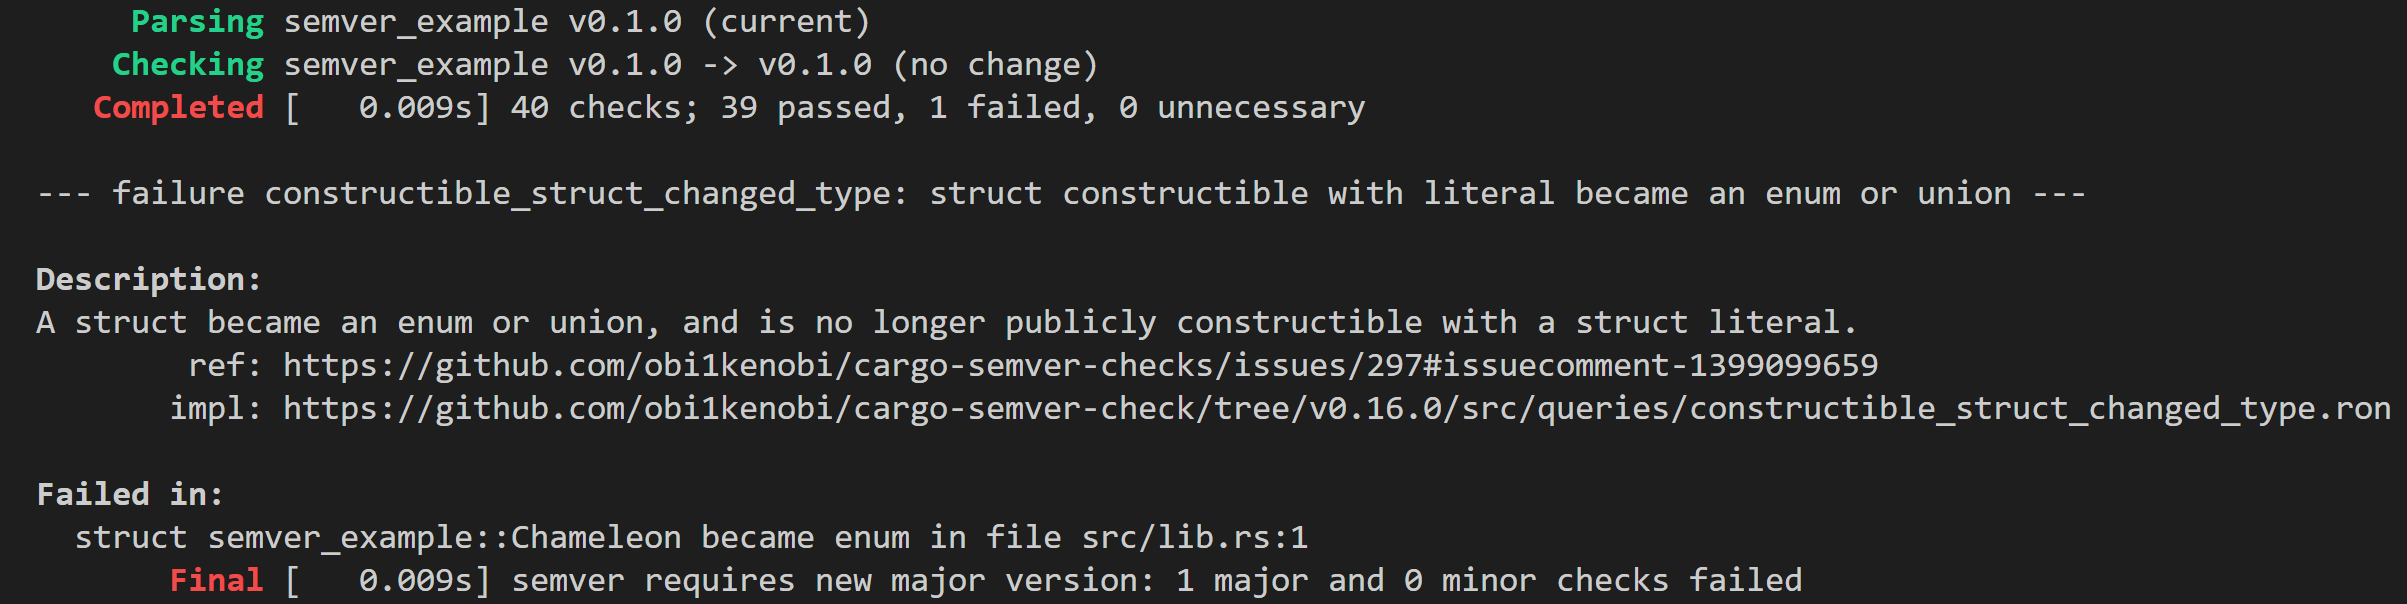 Terminal output from cargo-semver-checks showing a 'constructible_struct_changed_type' lint. The lint's description says "A struct became an enum or union, and is no longer publicly constructible with a struct literal." The lint specifies the offending code as "struct semver_example::Chameleon became enum in file src/lib.rs:1"